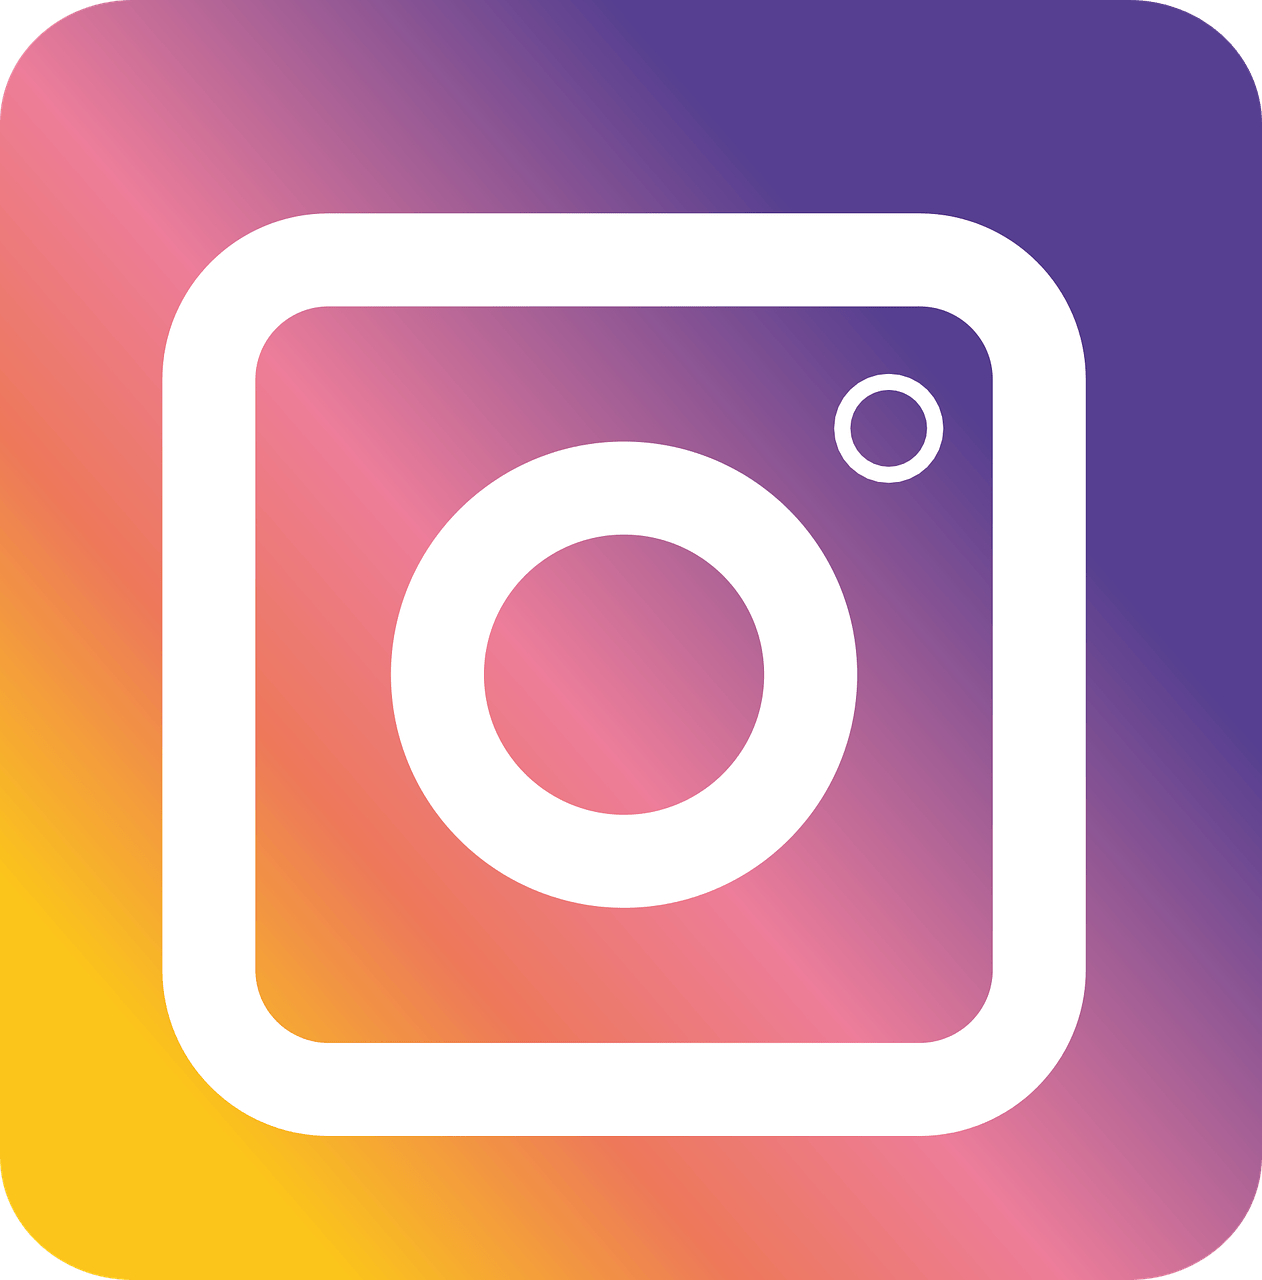 Instagram Reels (Scenes) expands to compete with TikTok